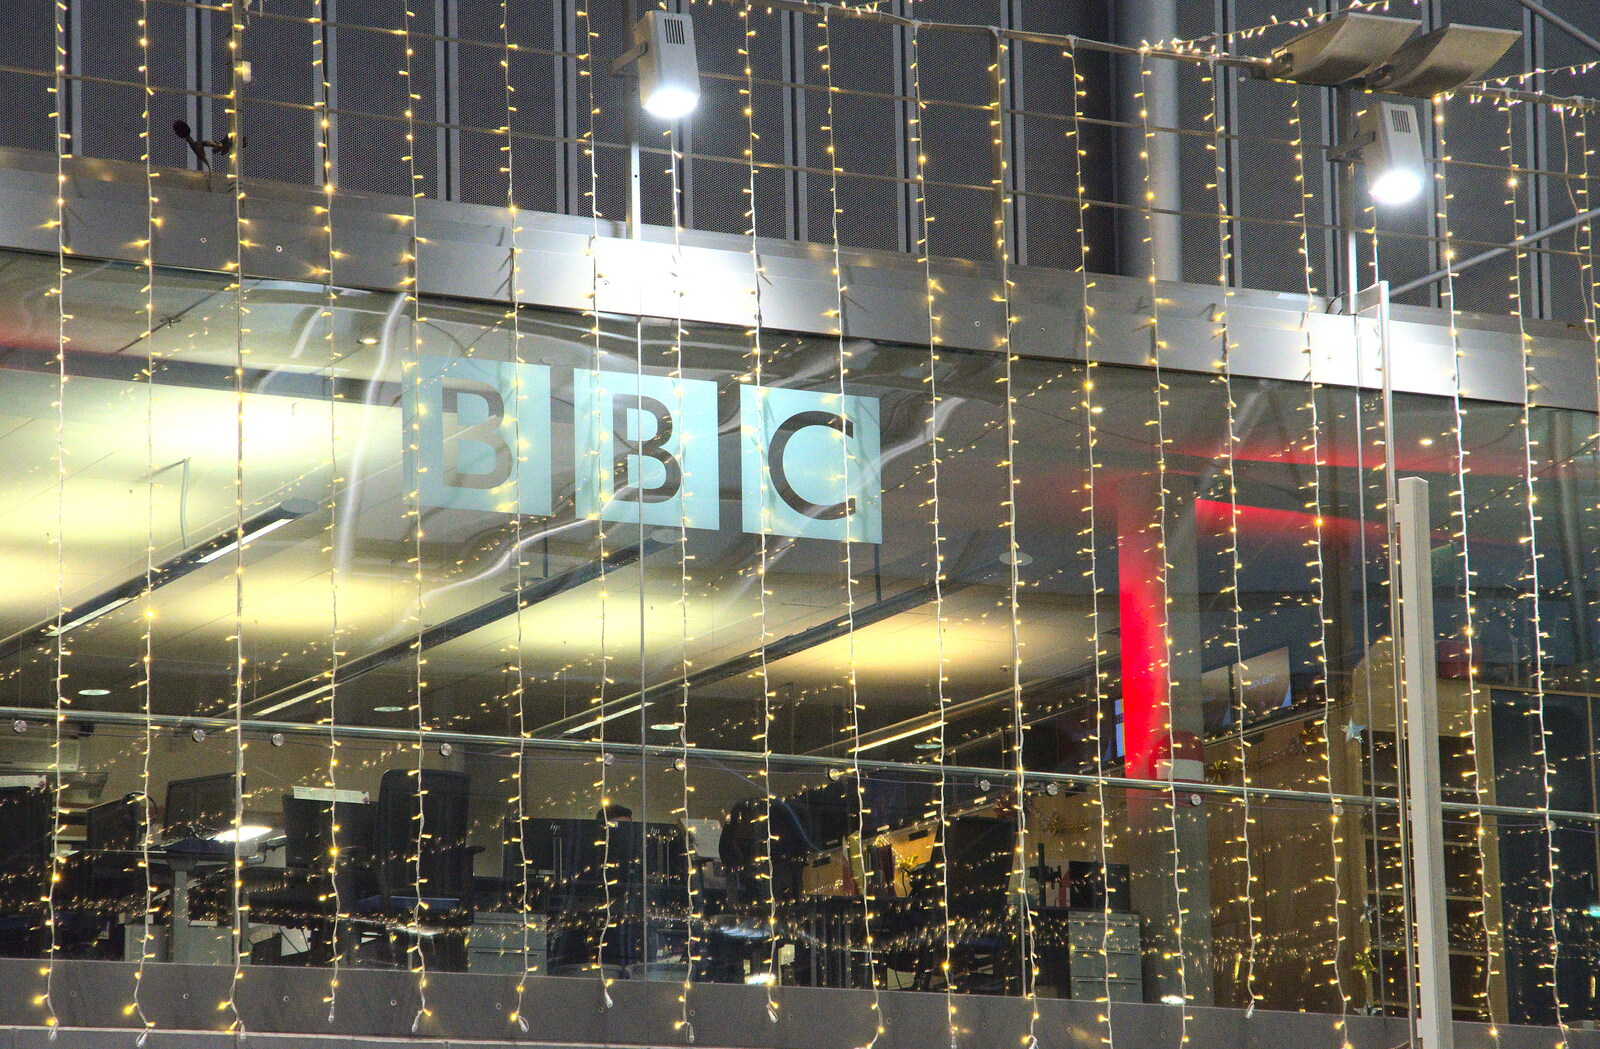 The BBC Norfolk studios from A Bit of Christmas Shopping, Norwich, Norfolk - 23rd December 2020